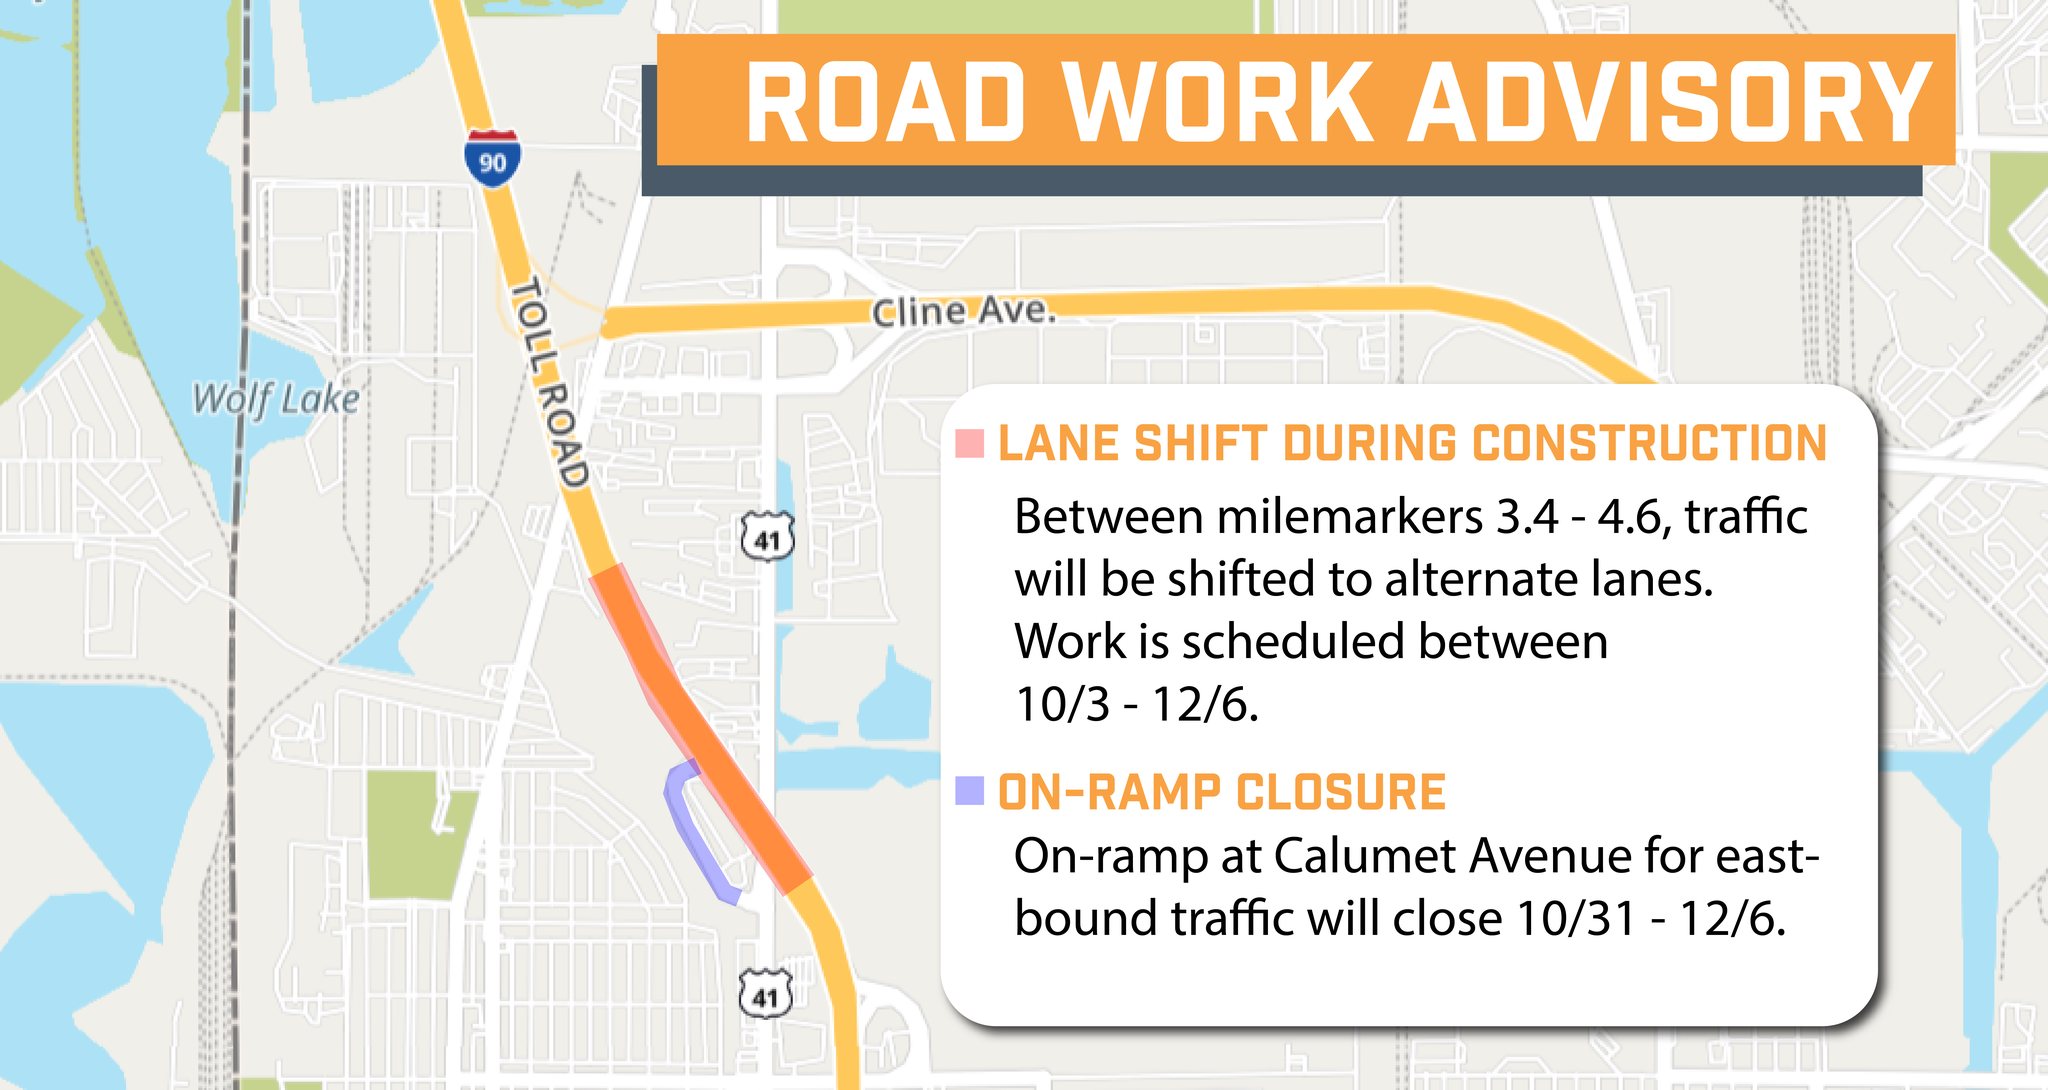 Lane shift during construction in Lake County, on-ramp at Calumet to close